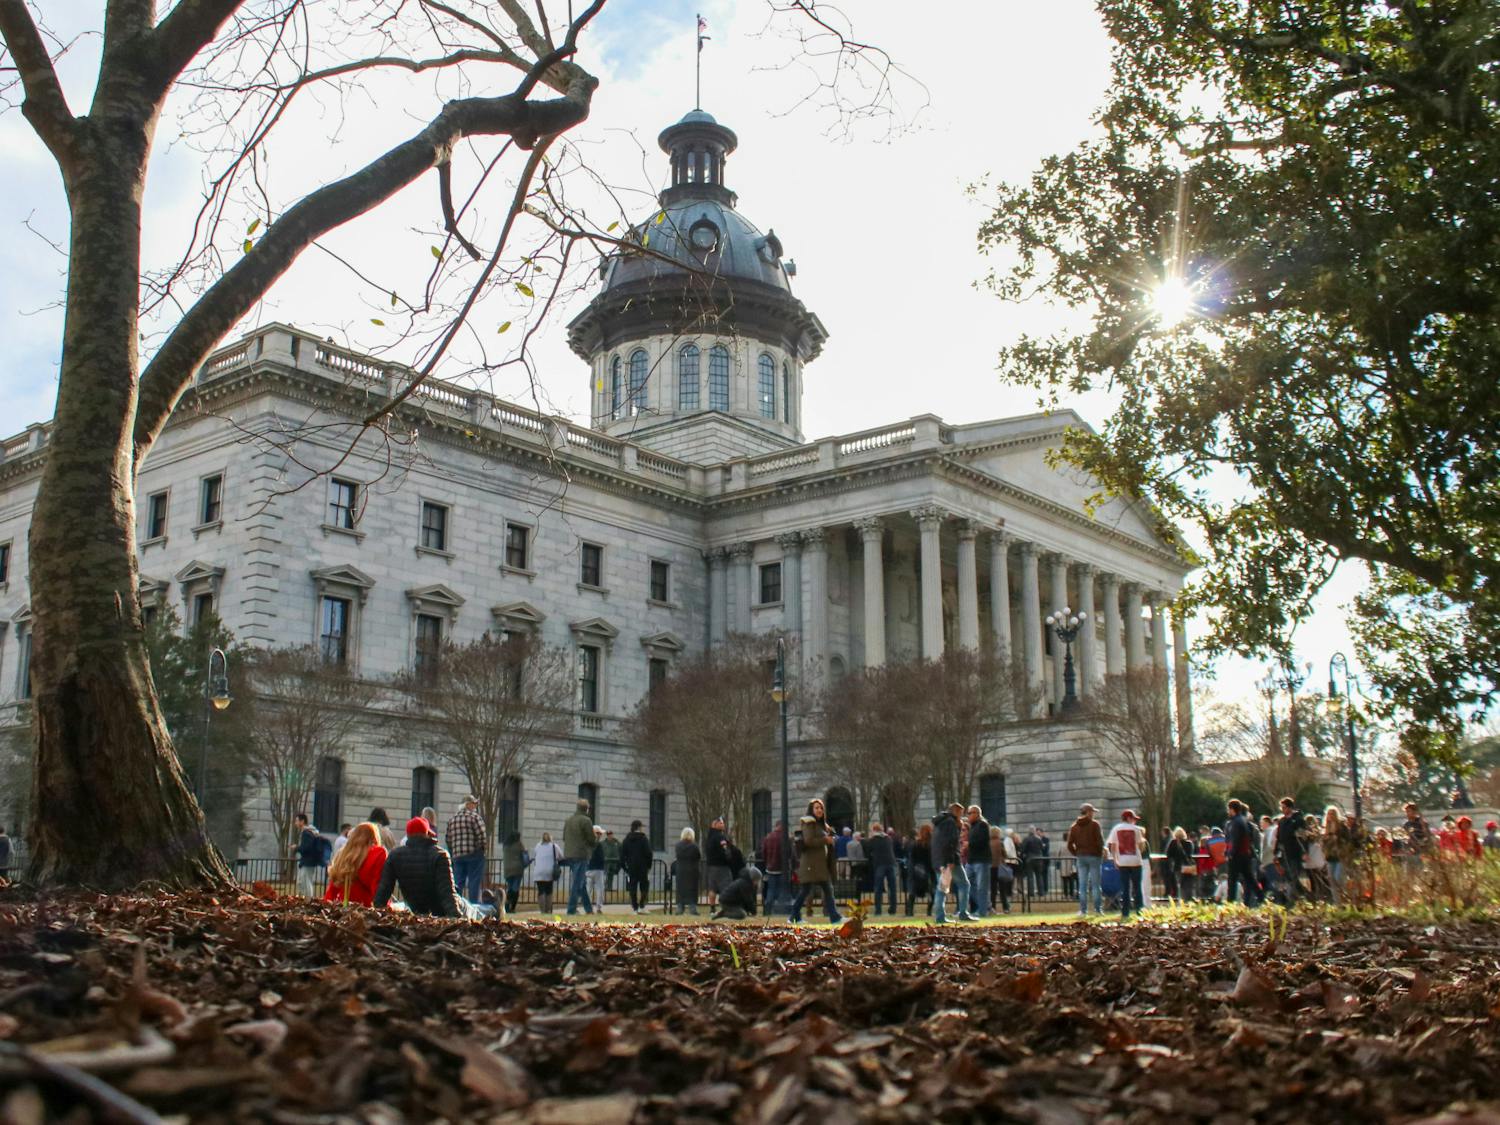 People arrived on the South Carolina Statehouse lawn as early as 2 p.m. for Donald Trump's late afternoon appearance on Jan. 28, 2023. A fence wrapped around the Statehouse grounds separating the majority Trump supporter crowd from the 500 individuals that were escorted into the private event.&nbsp;